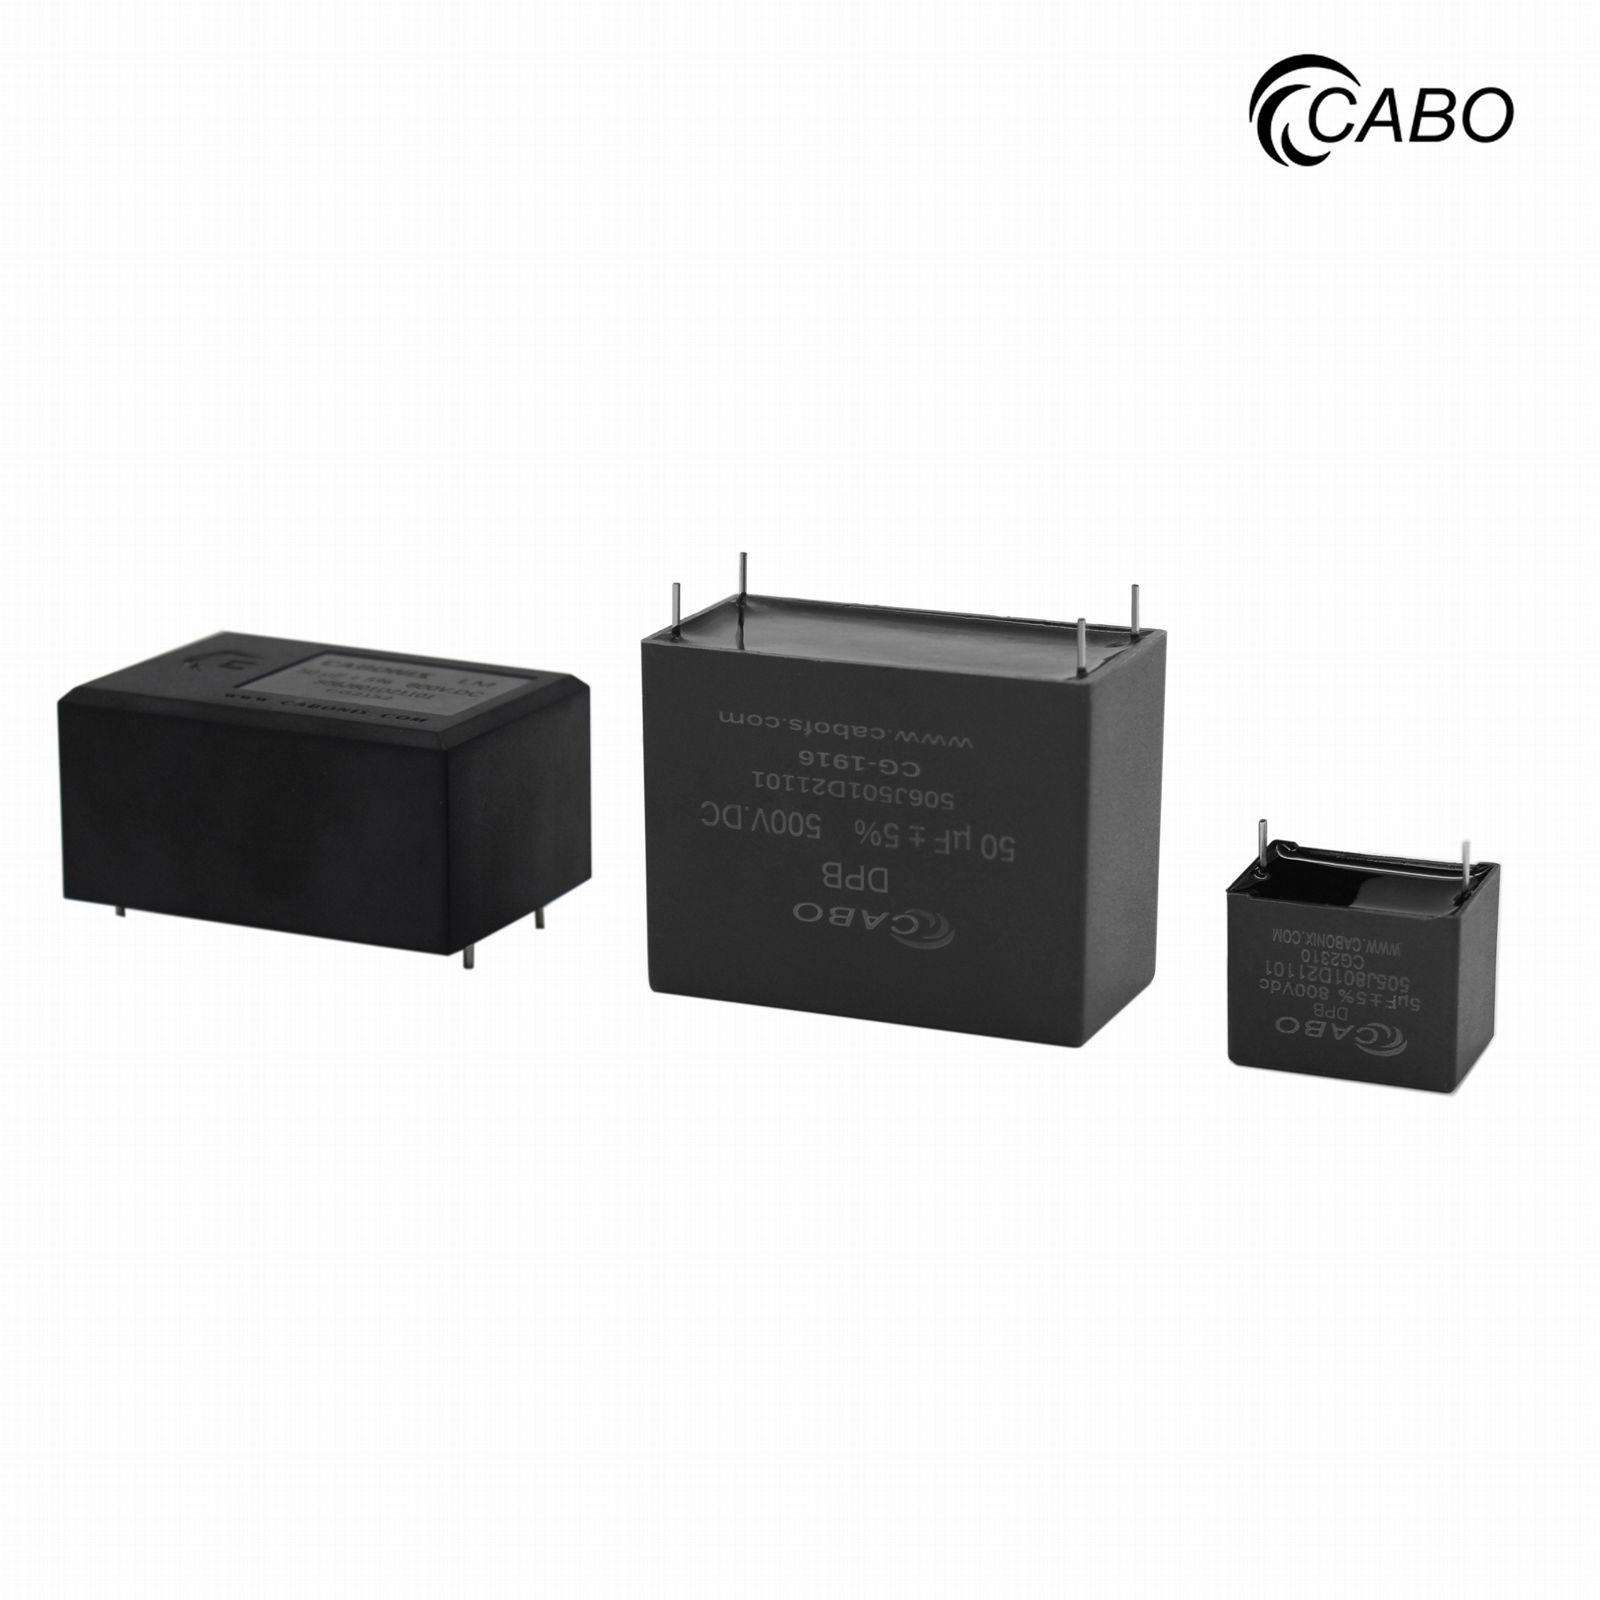 Cabo DPB series dc link dc filter capacitor